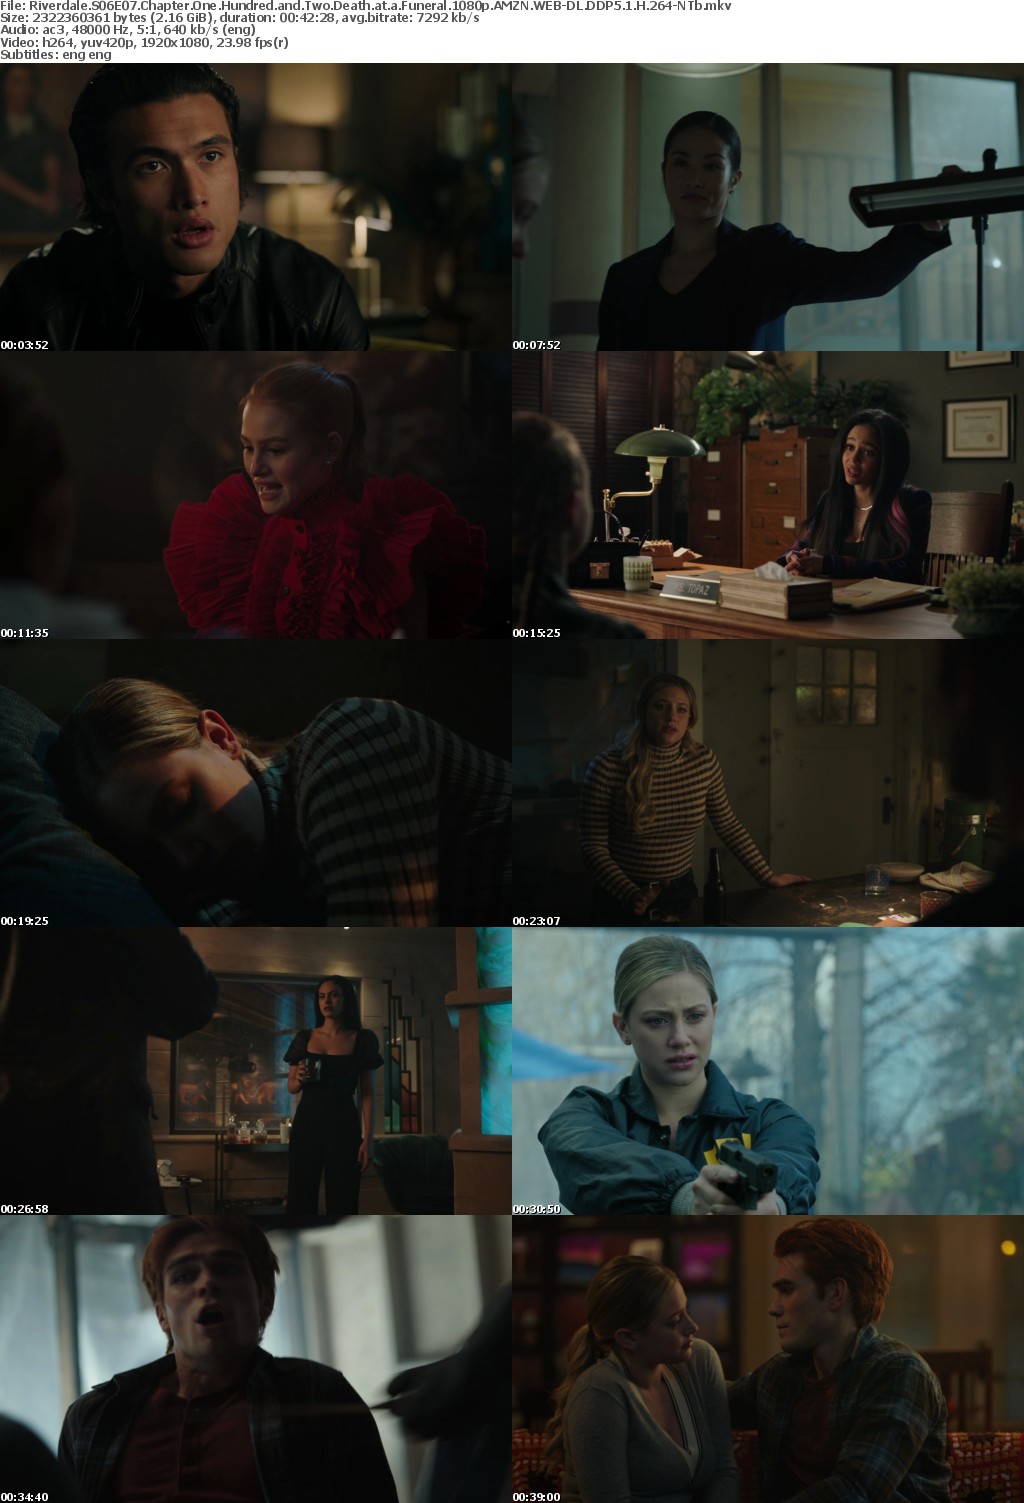 Riverdale US S06E07 Chapter One Hundred and Two Death at a Funeral 1080p AMZN WEBRip DDP5 1 x264-NTb